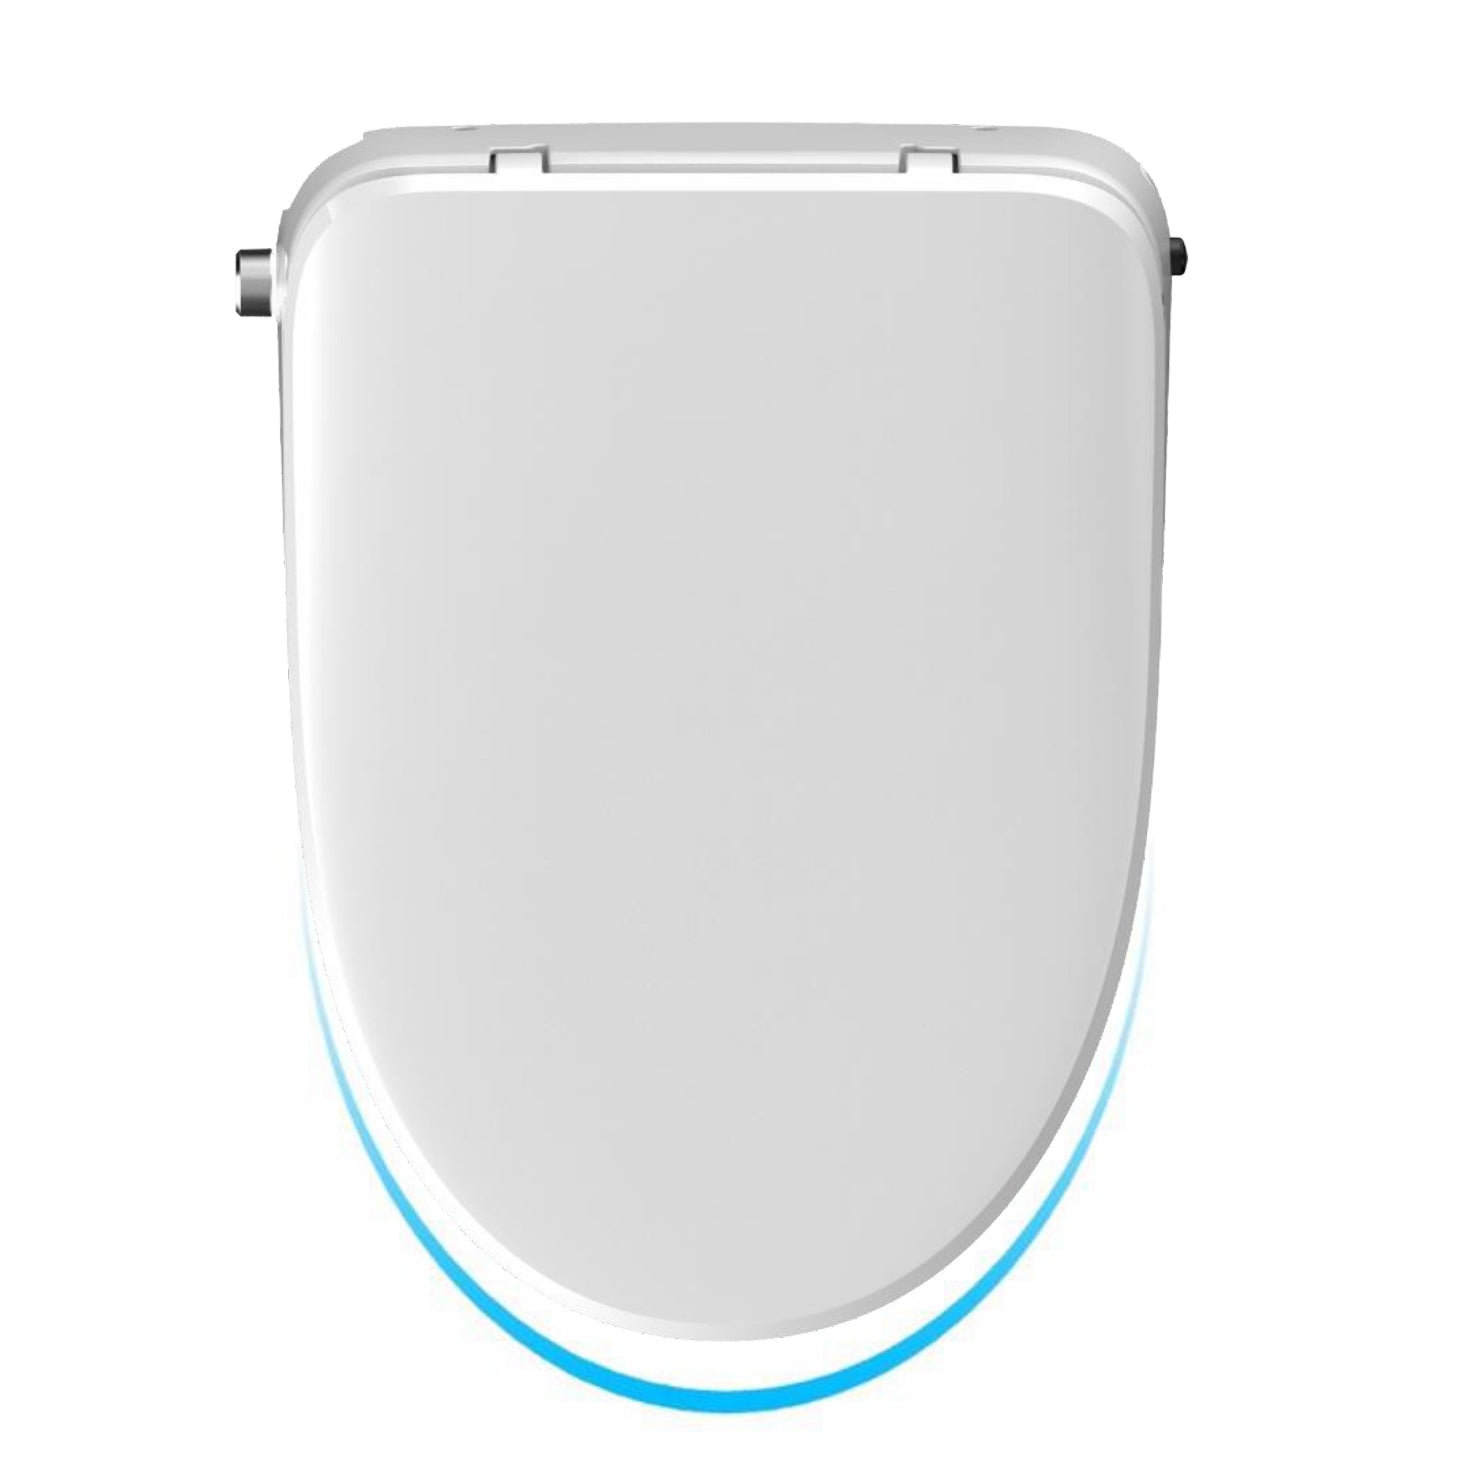 JOMOO WASHLET SMART SEAT WITH REMOTE CONTROL (ELONGATED)